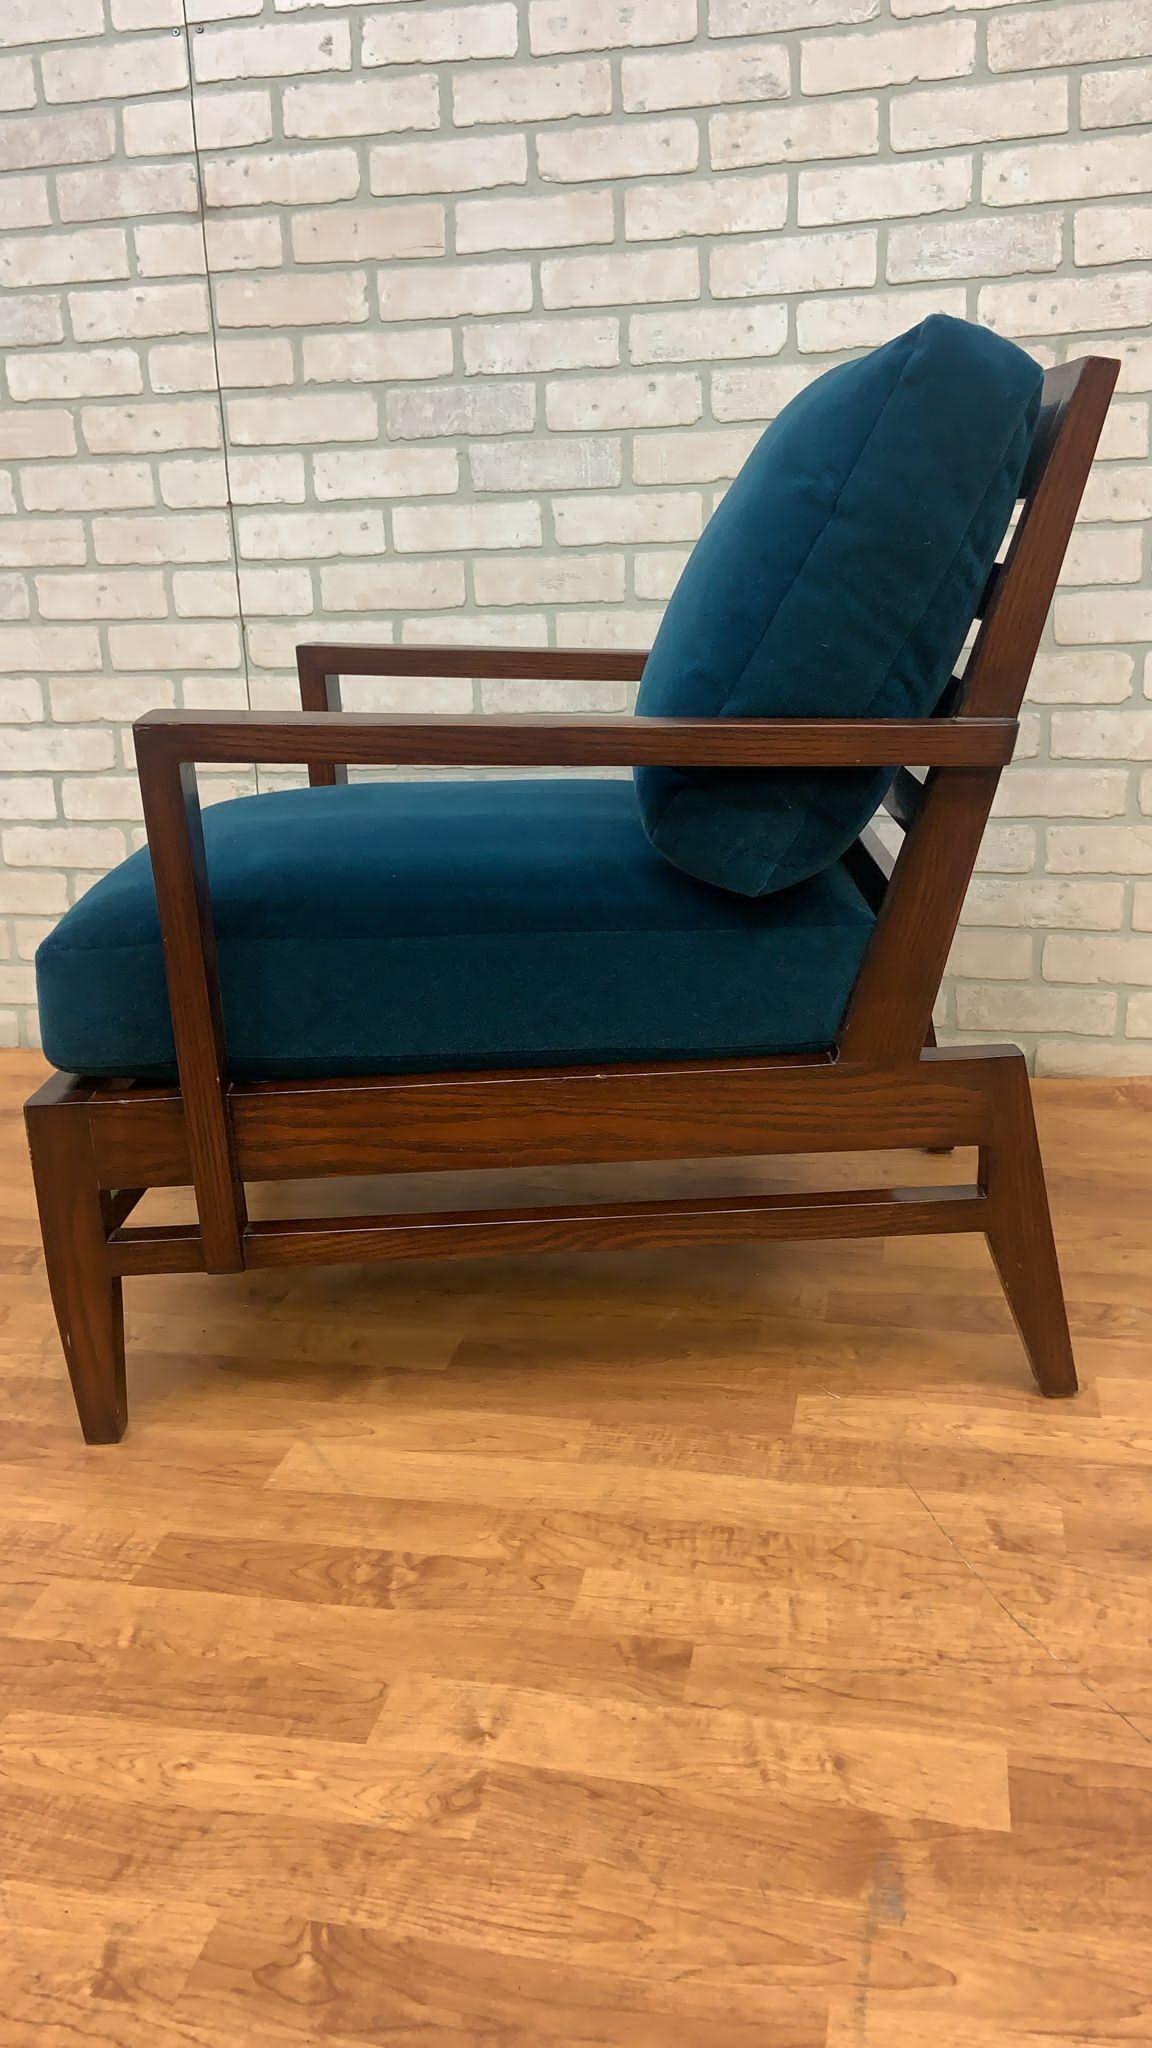 Vintage French René Gabriel Cherry Wood Slat Back Lounge Chair in Teal Mohair In Good Condition For Sale In Chicago, IL